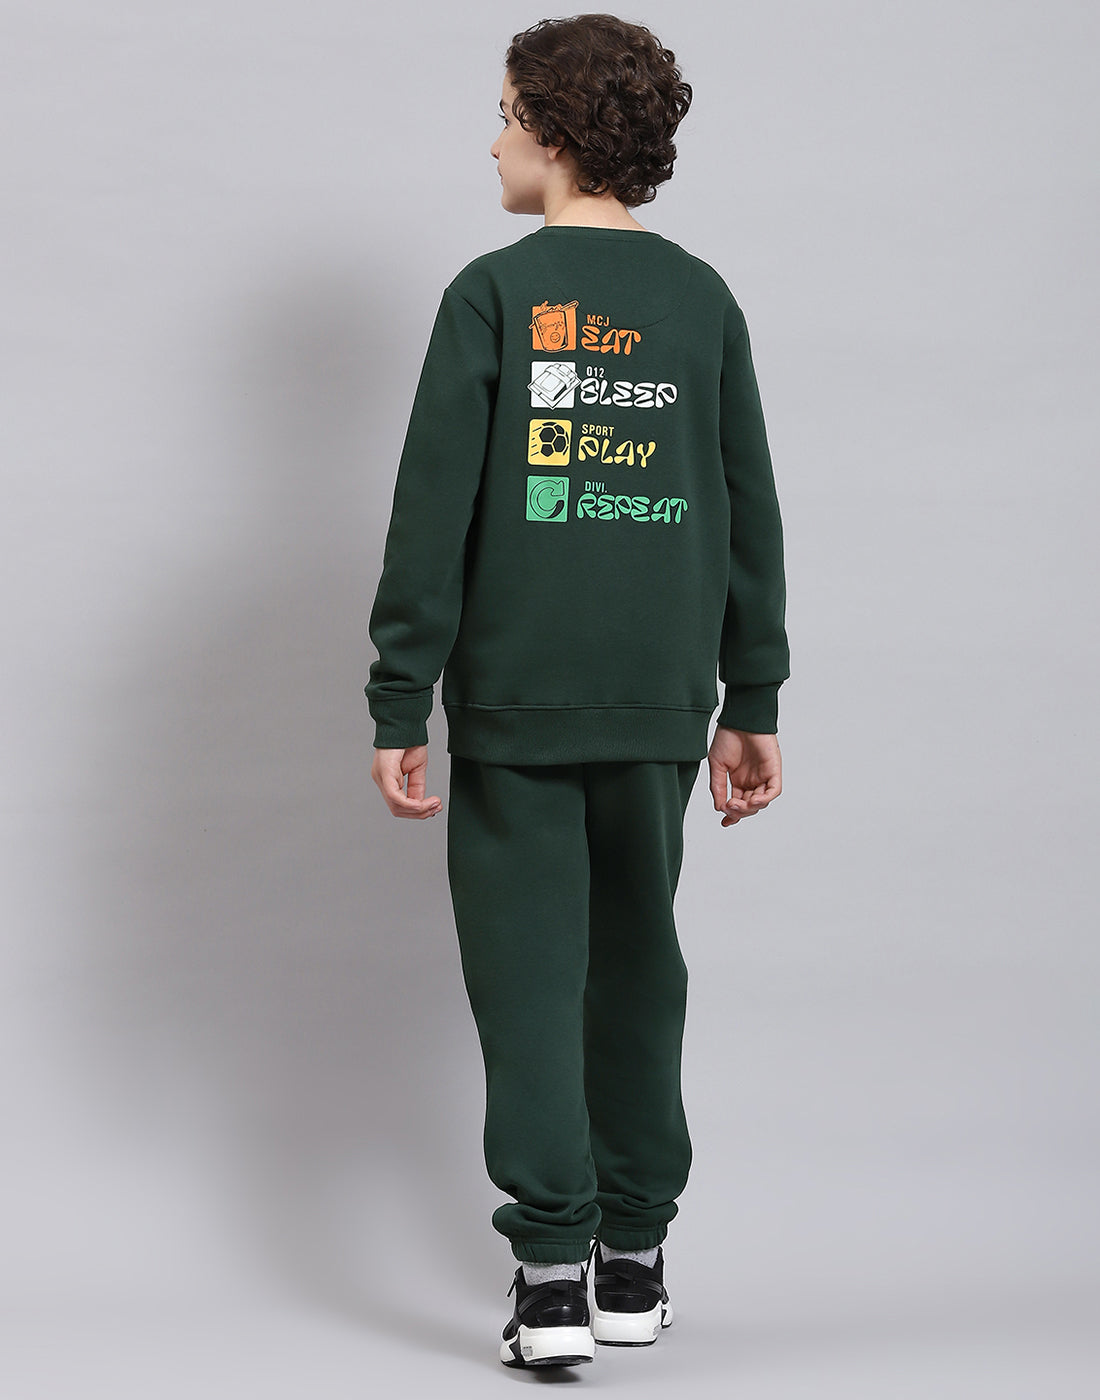 Boys Green Printed Round Neck Full Sleeve Tracksuits